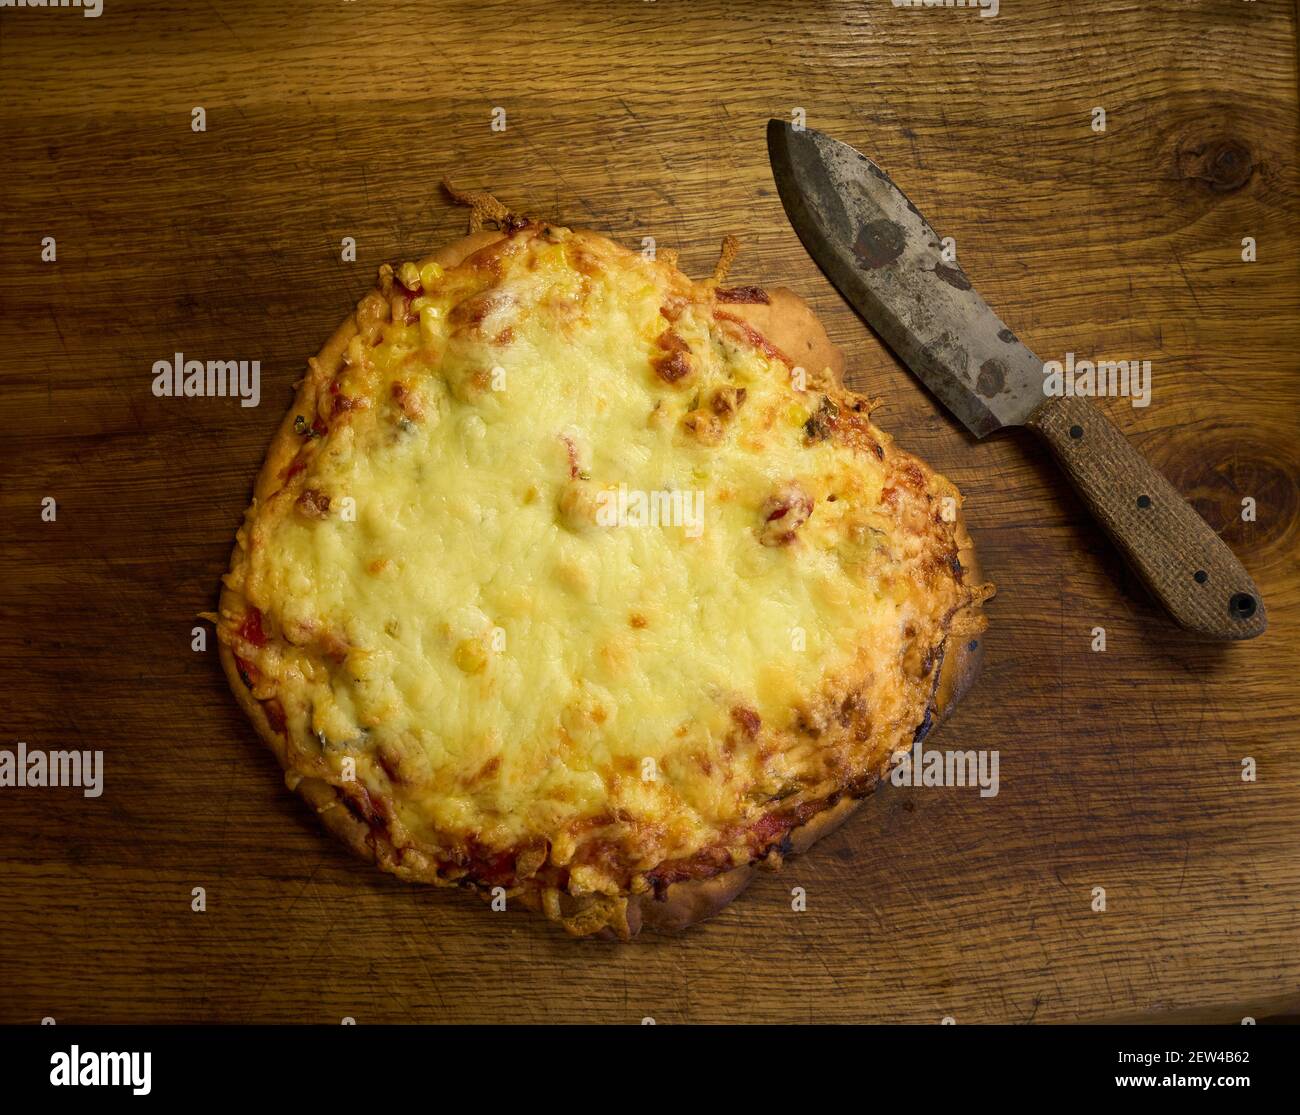 Home cooked flatbread cheese and tomato pizza on a wooden board next to a rustic carbon steel knife with patina on blade Stock Photo